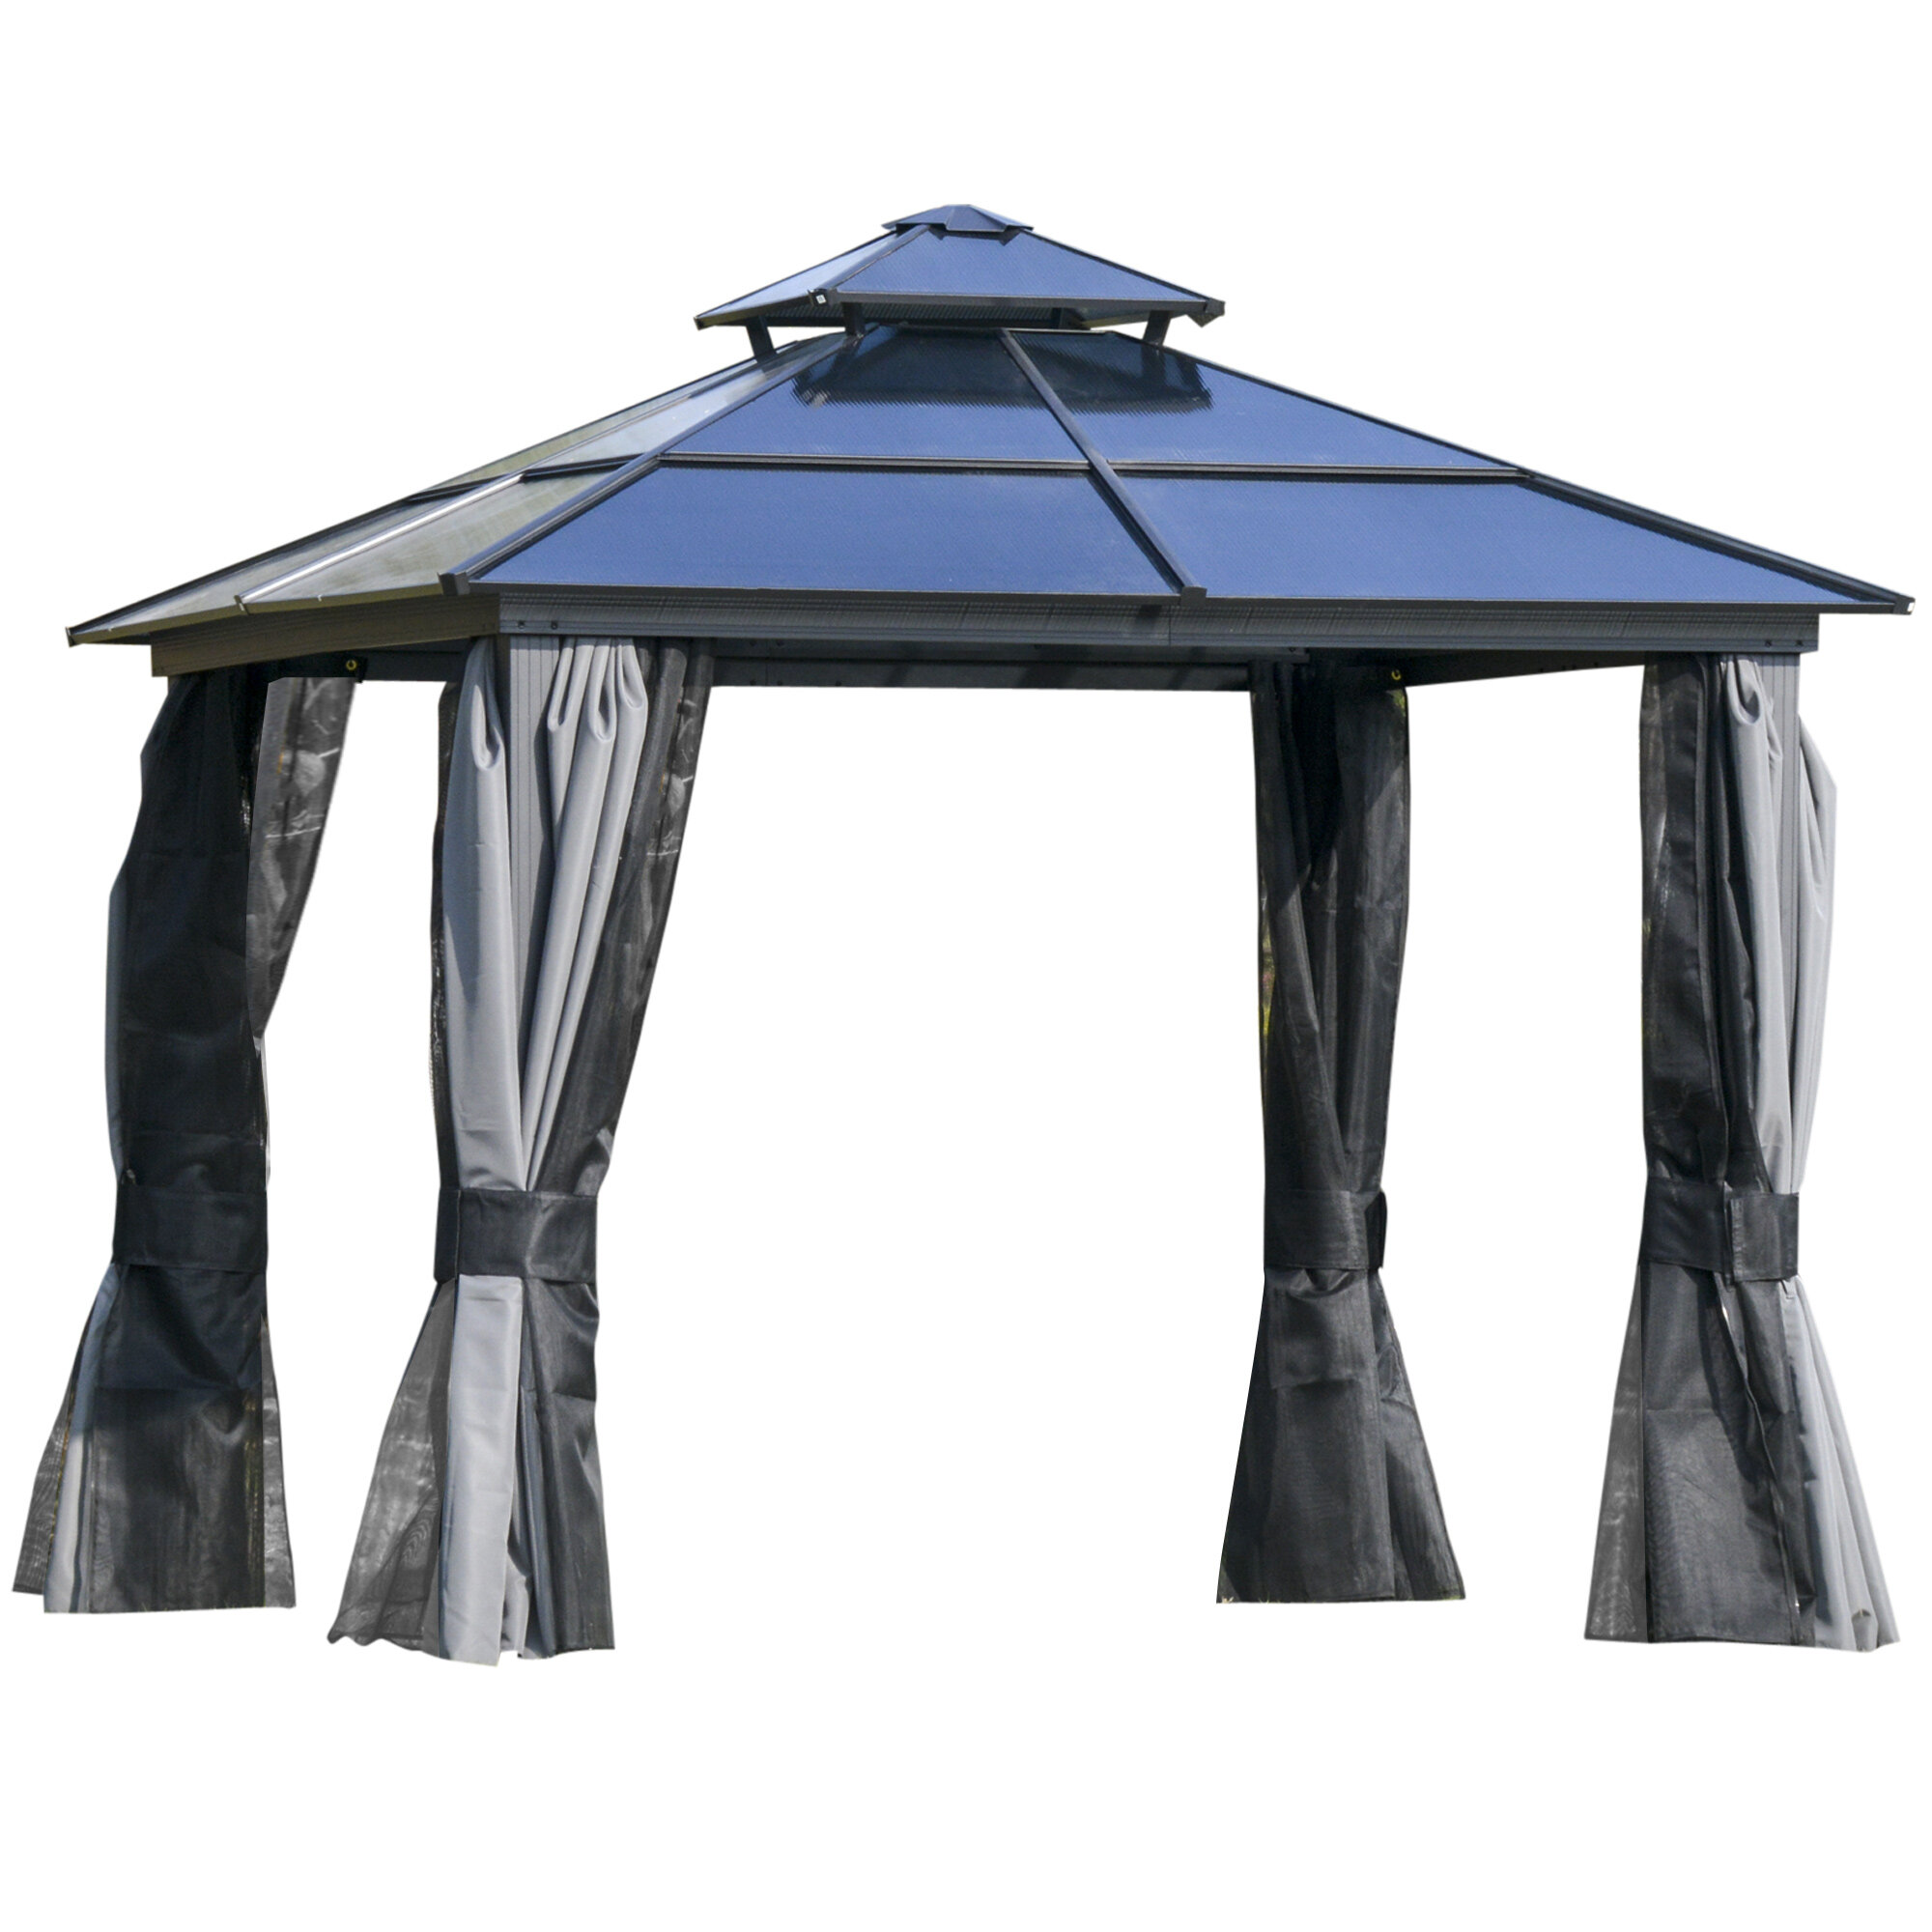 Angel Living Replacement Top Cover Roof for 3X3M Garden Metal Gazebo 1 Tier Gazebo Roof Replacement Tent Canopy Beige